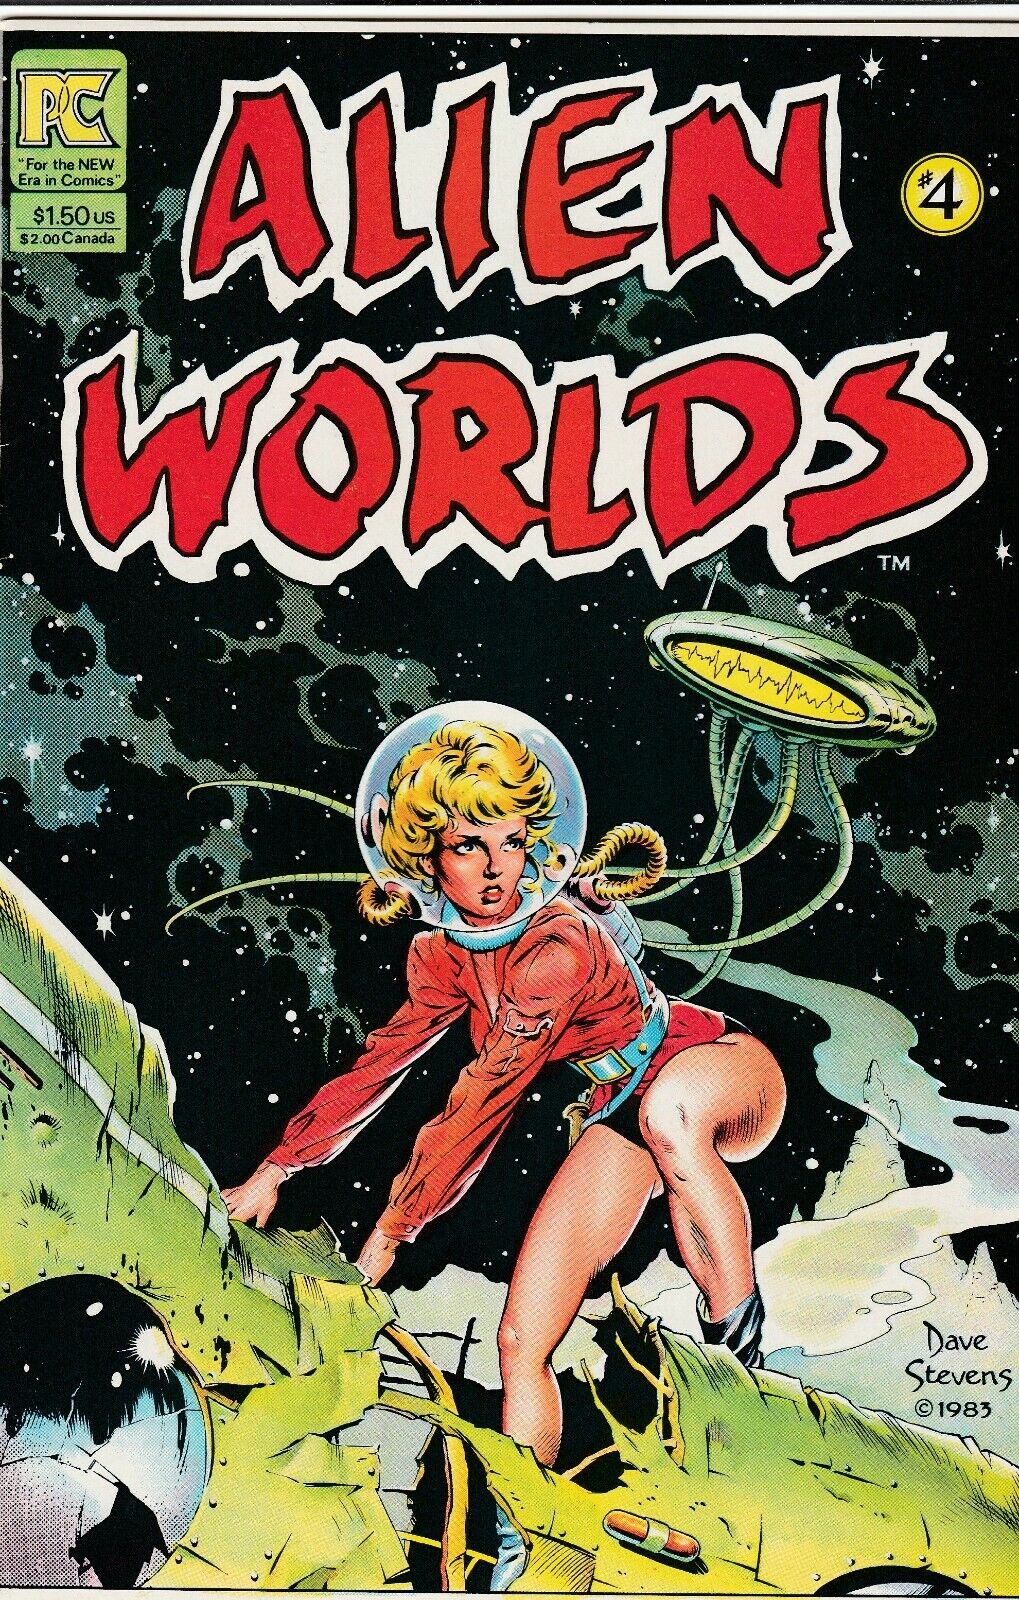 ALIEN WORLDS # 4  DAVE STEVENS SEXY COVER 2 1982 PACIFIC HTF .99 AUCTIONS